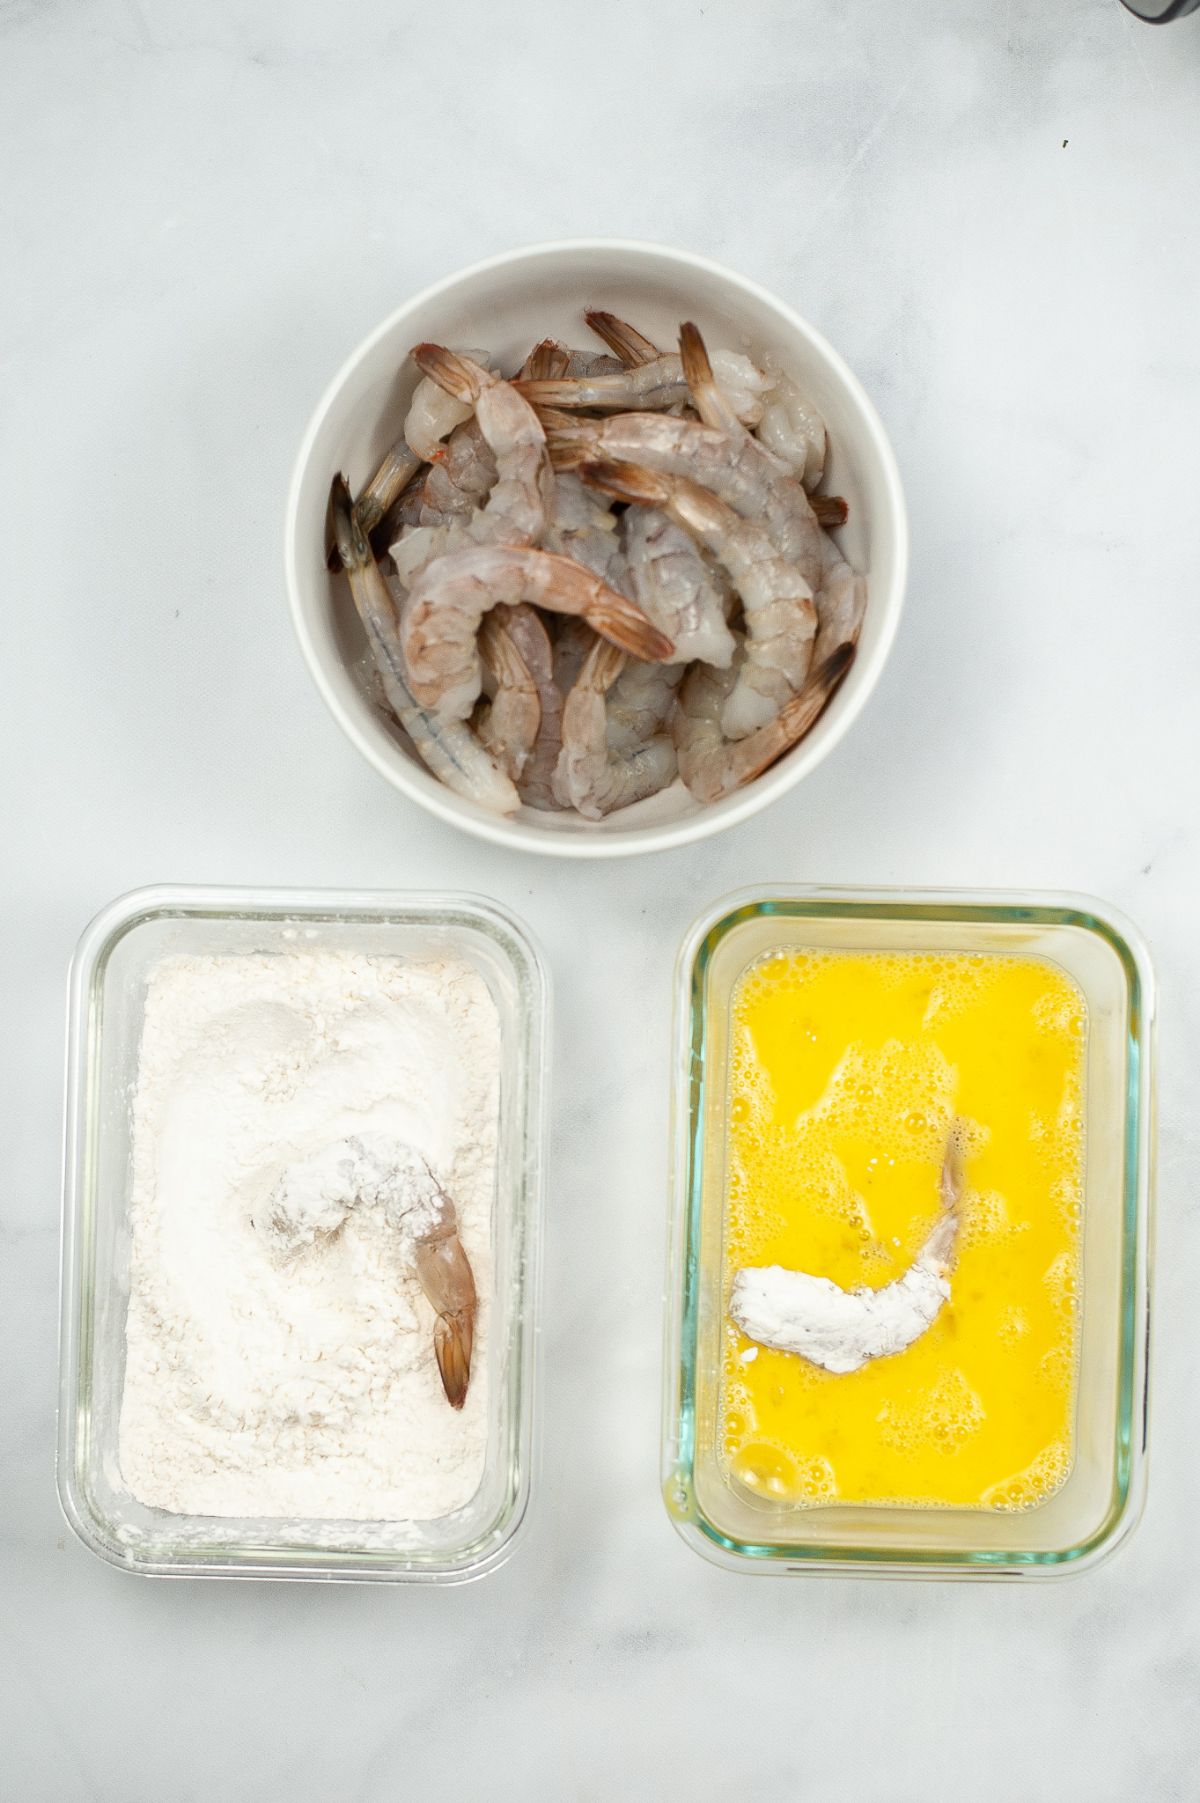 In three separate bowls are cleaned shrimp, flour and cornstarch mixture, whisked eggs.